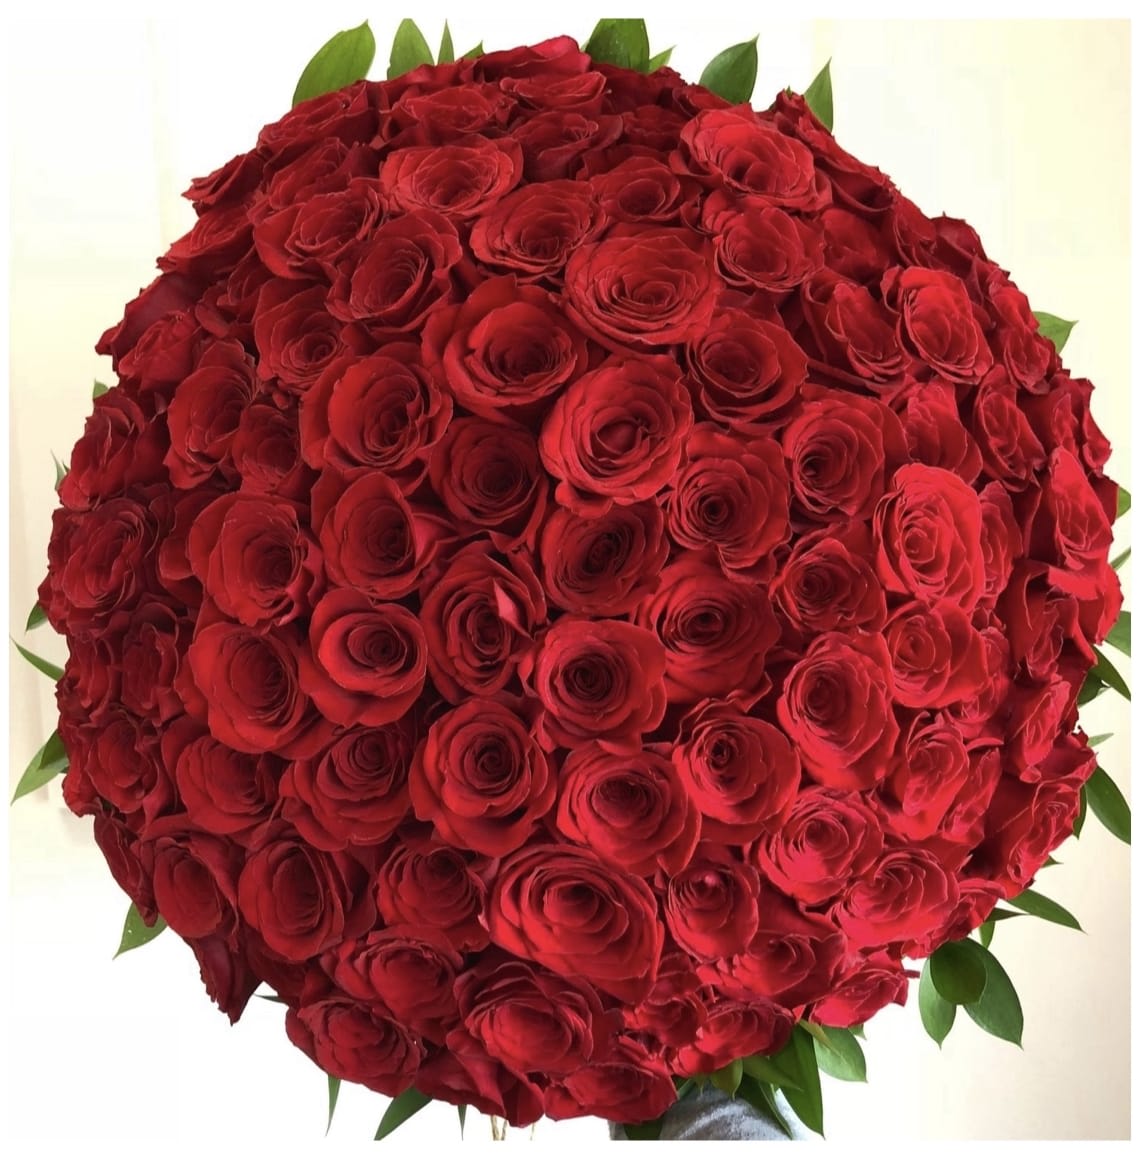 200 roses hand-tide bouquet in Doral, FL | Doral Orchids Florals & Events